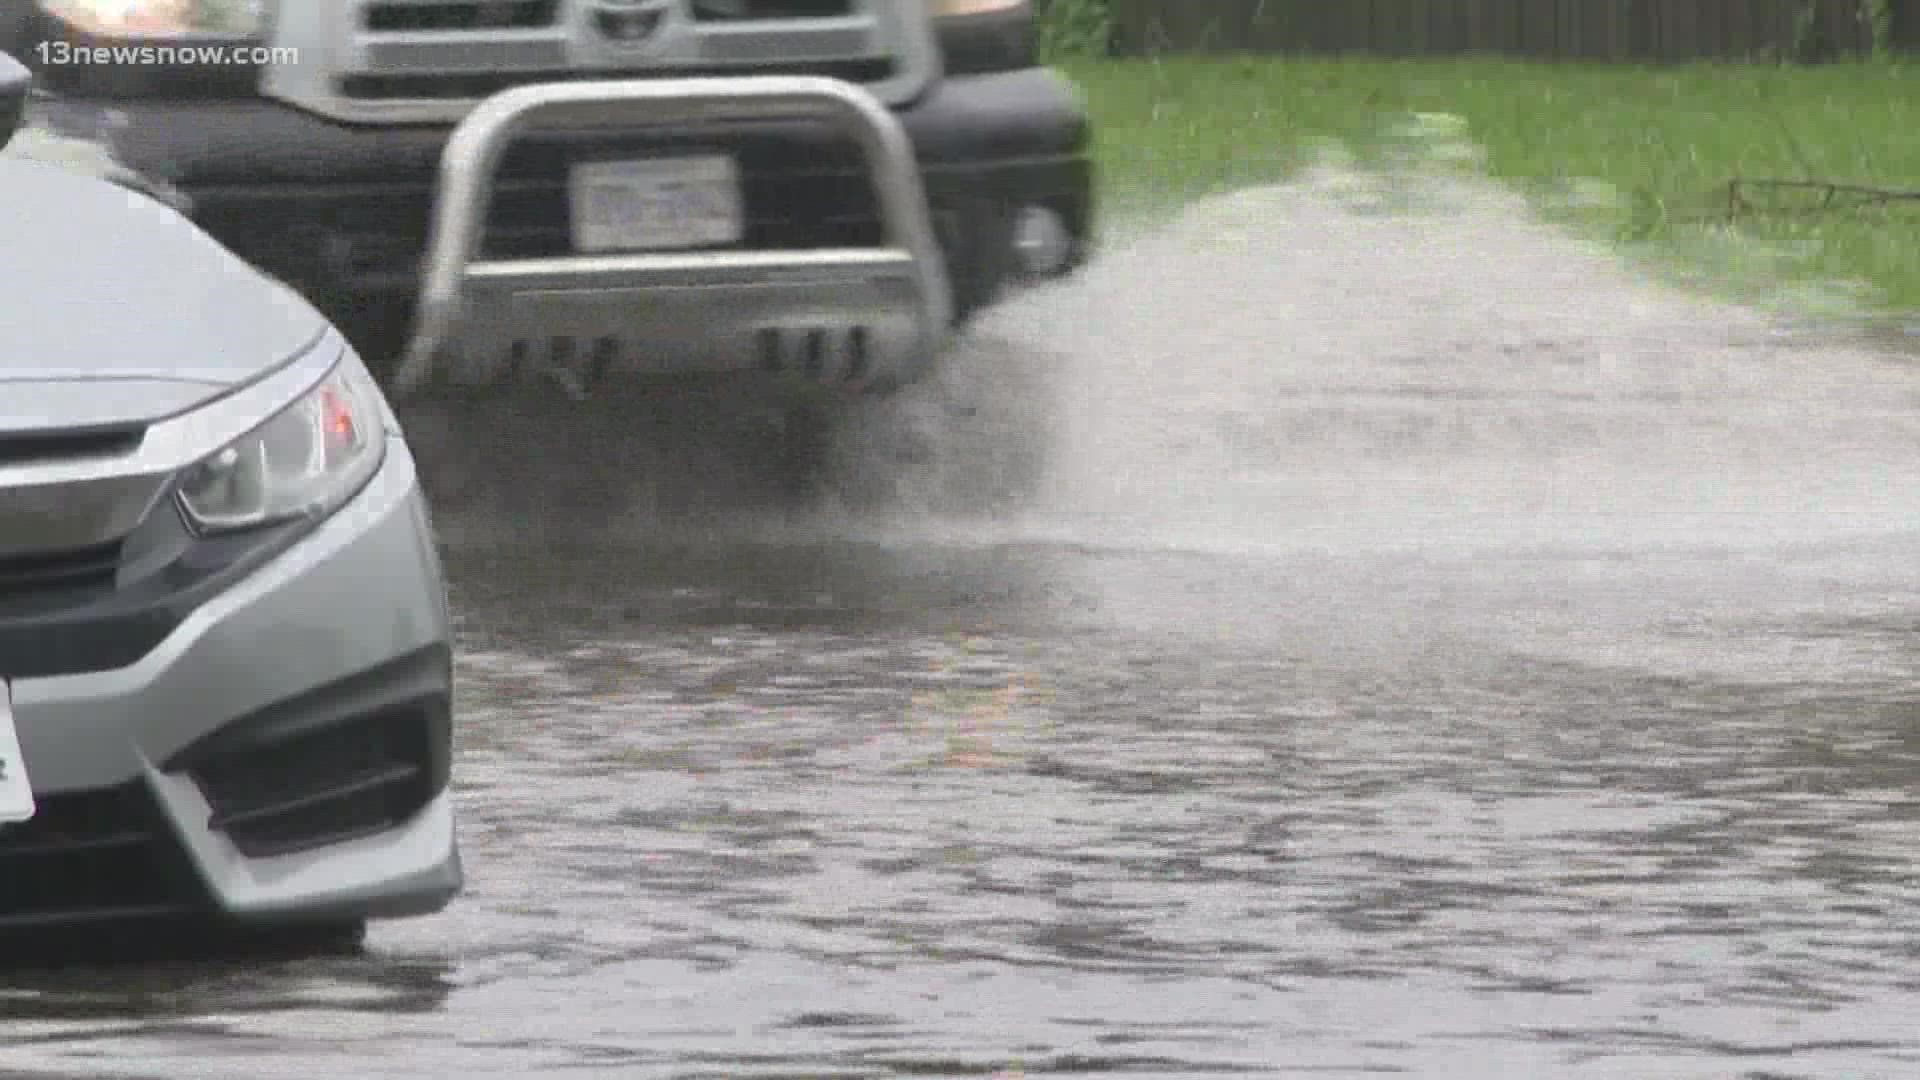 Flooding is an all-too-common story in Virginia Beach. That's why the city came up with a plan to speed up a flood protection program.